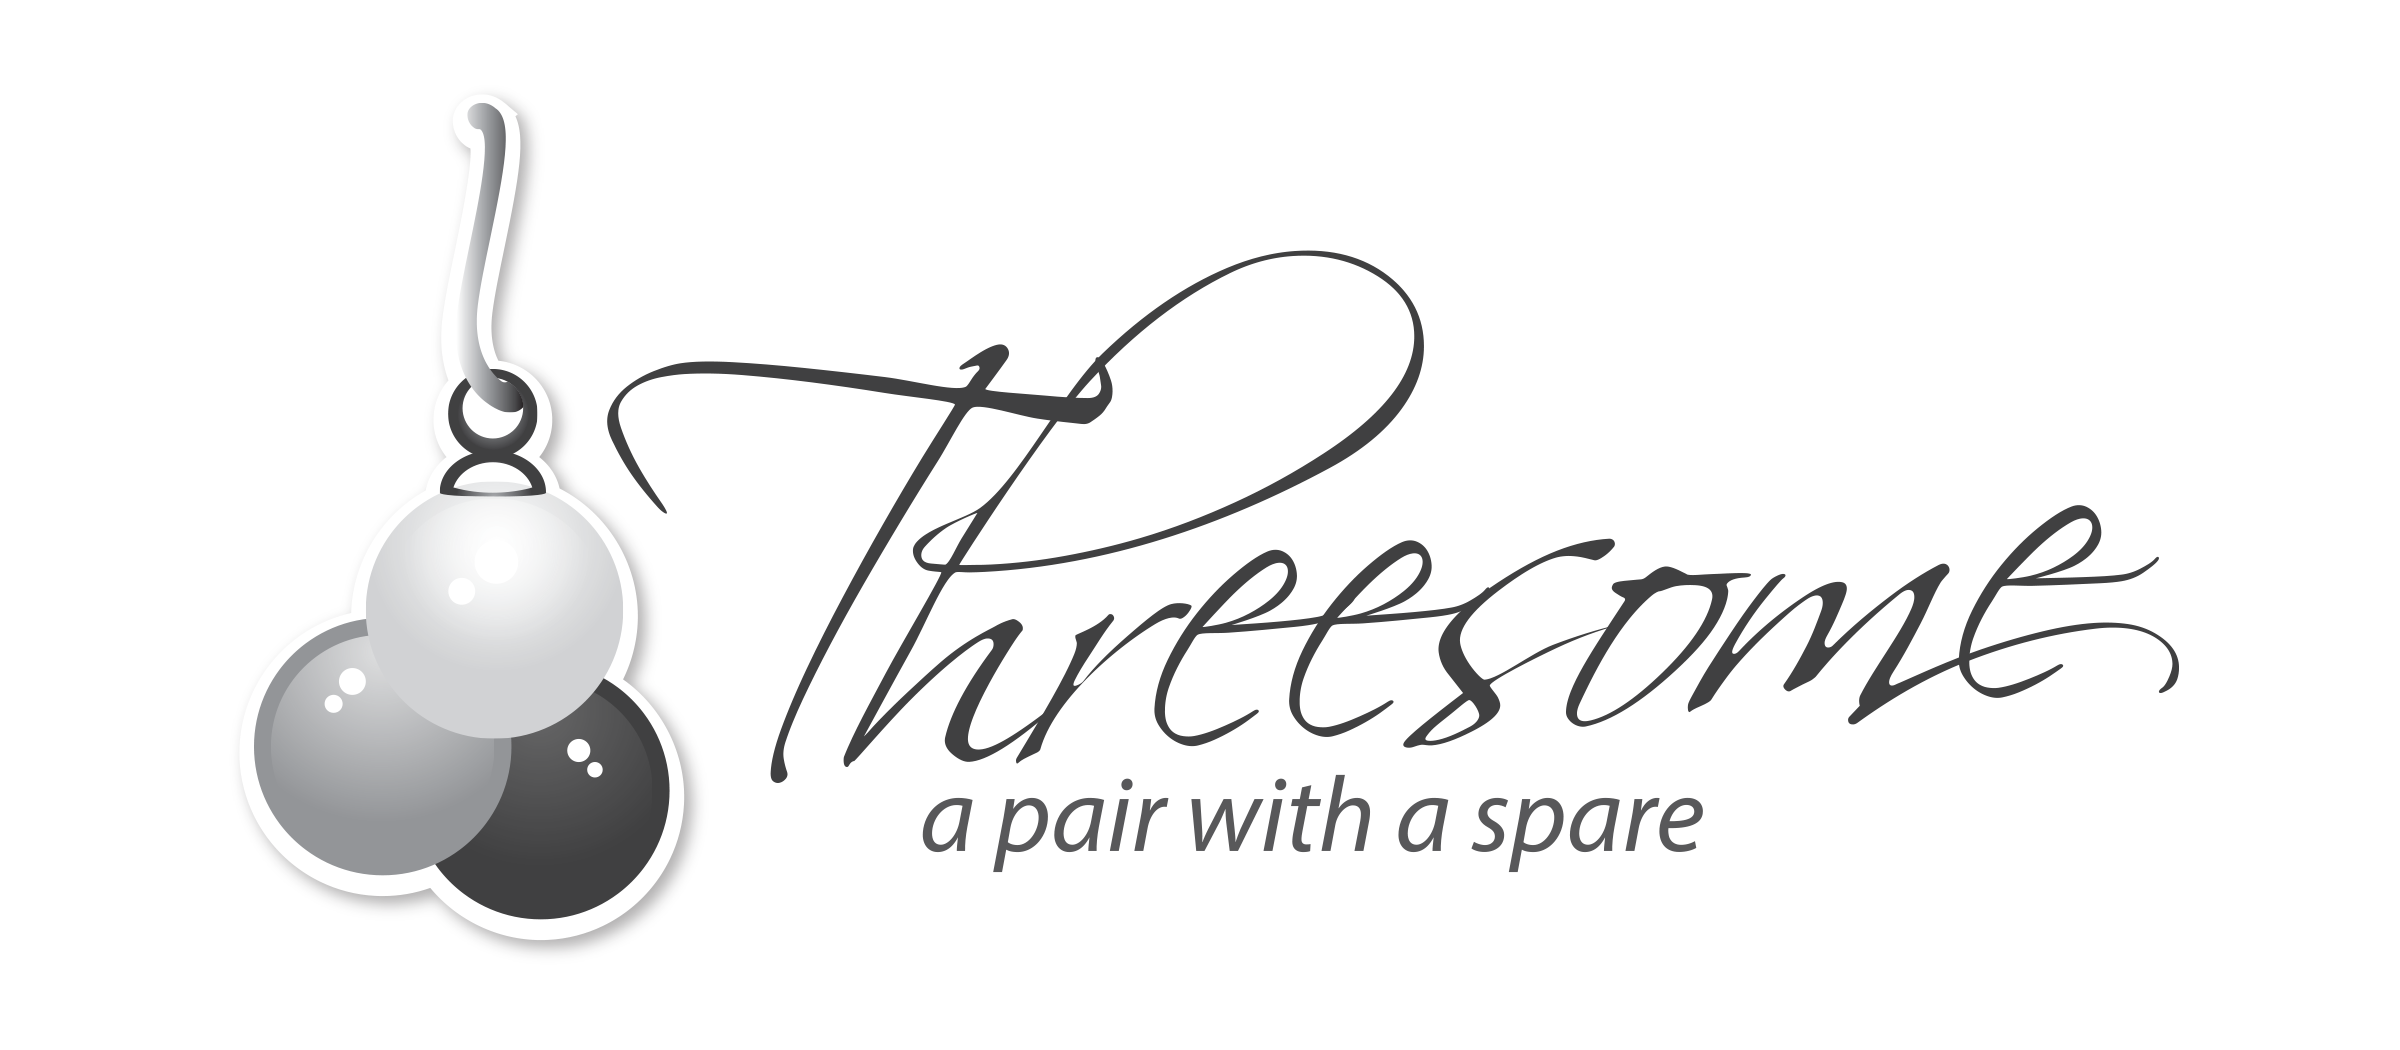 Threesome (A Pair with a Spare) is an accessory invention designed to address the issue of not being able to wear earrings when a piece goes missing or gets damaged